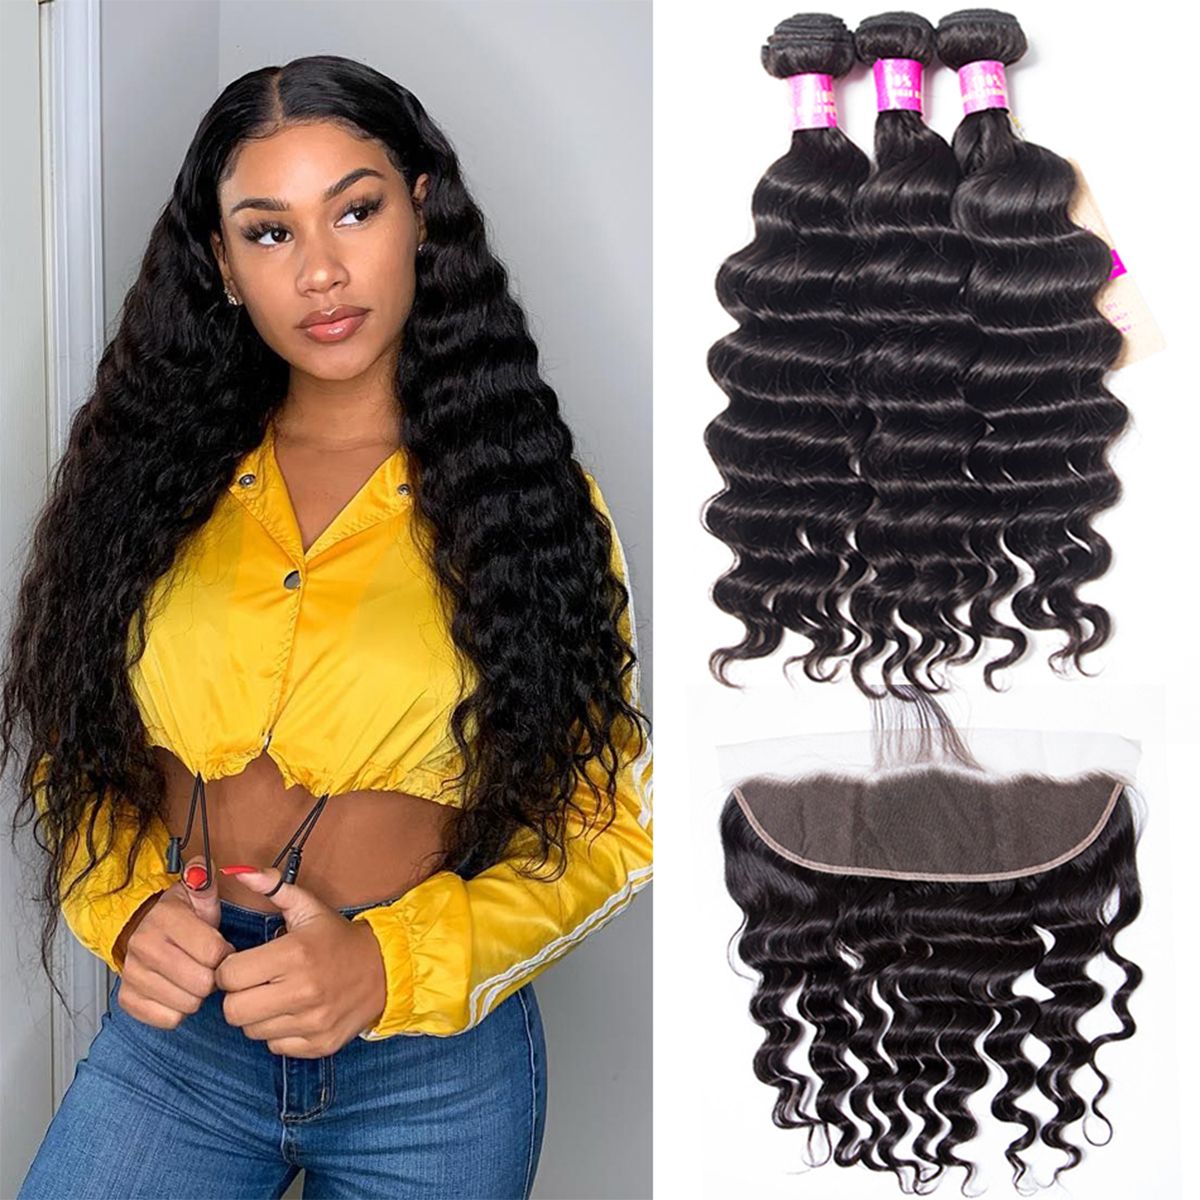 Lace Frontal Closure With Bundles Loose Deep Wave Brazilian Hair Weave 3 Bundles With Frontal Can Be Dyed And Bleached